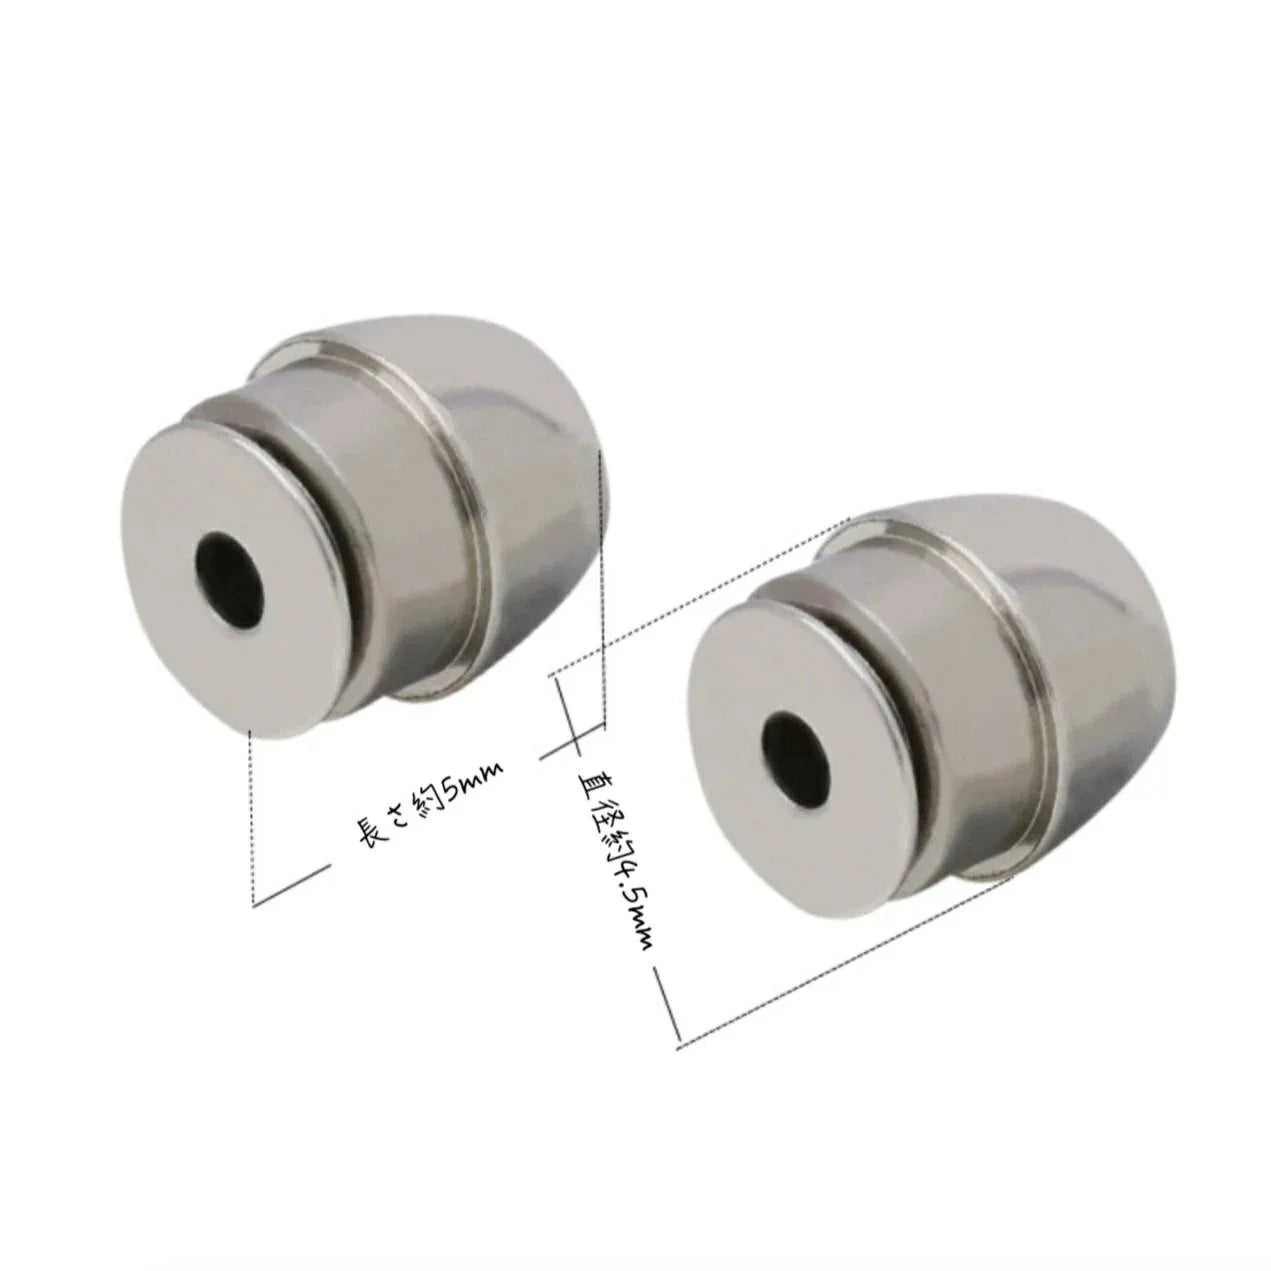 S001 stainless catch